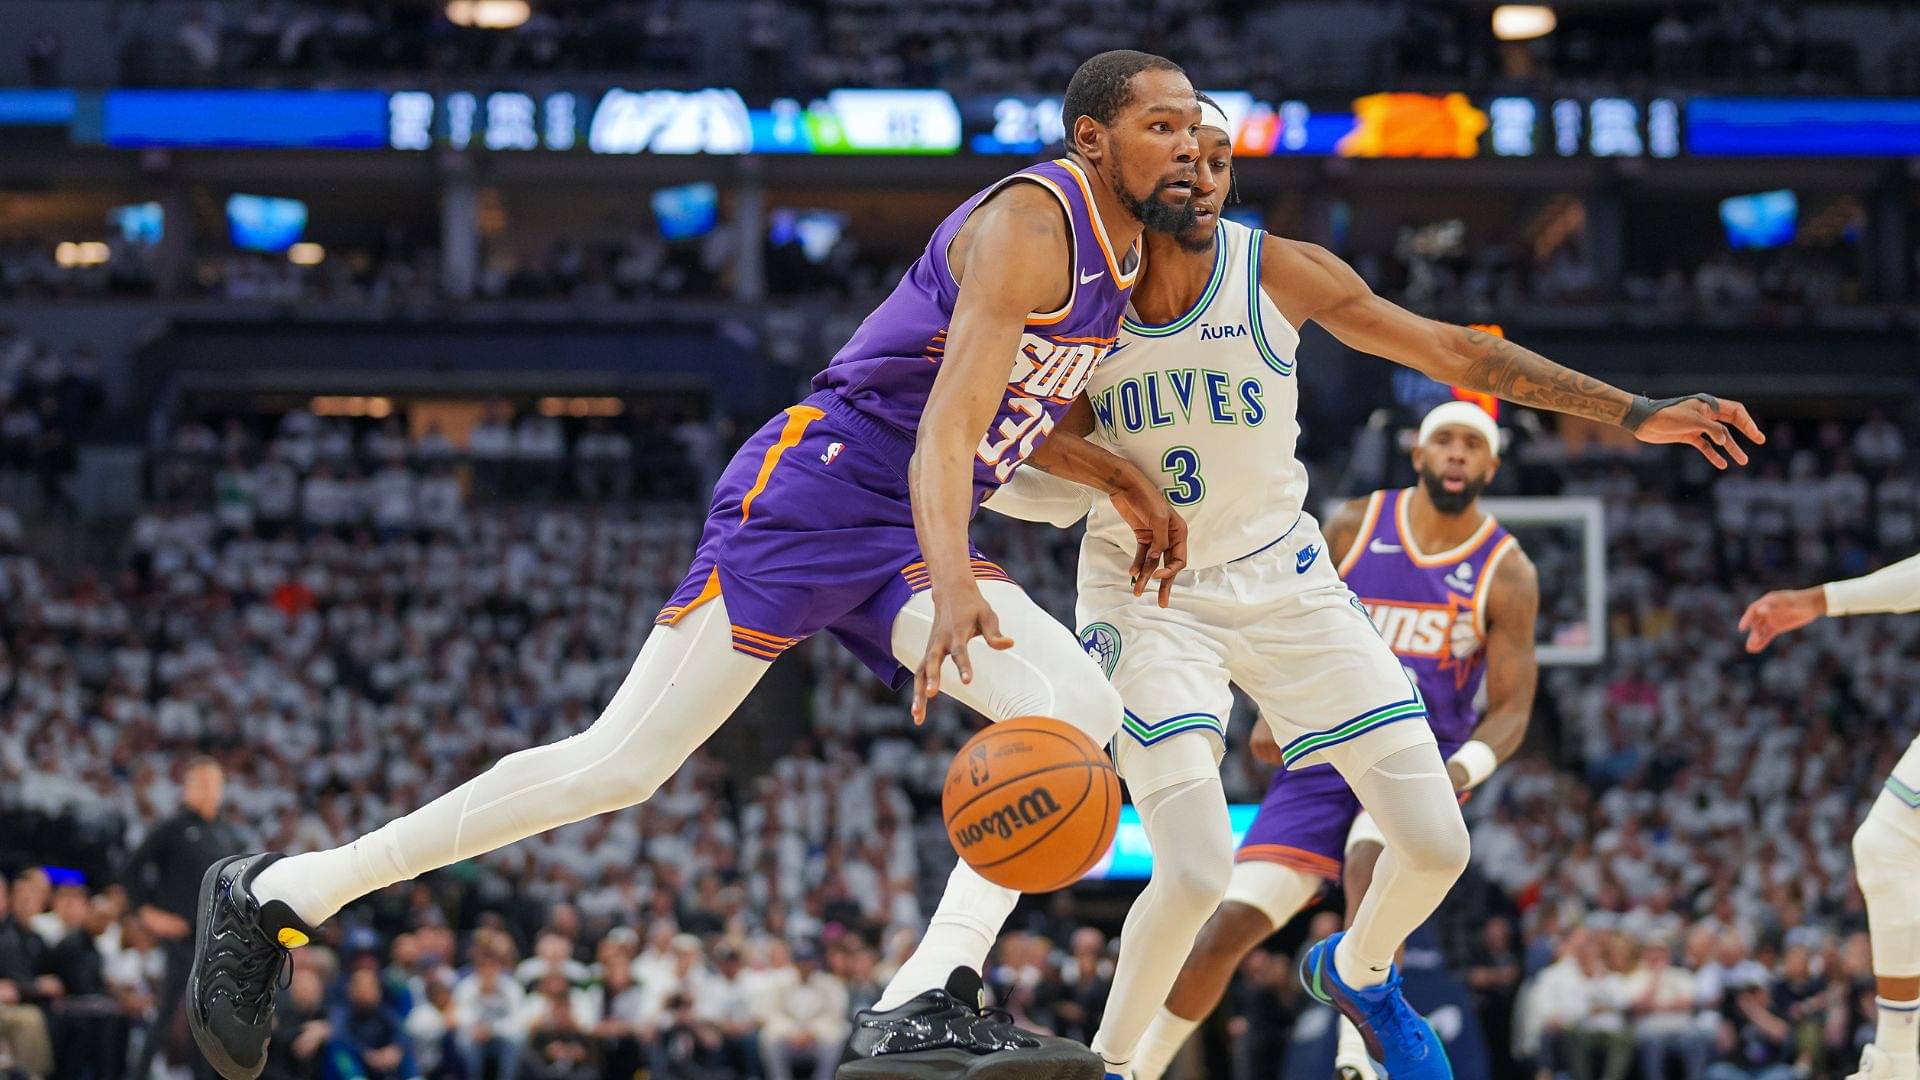 Kevin Durant Reminded Suns Players Of His 12 Year Old ‘Down 0-2’ Run Against The Spurs To Motivate Them Ahead Of Game 3